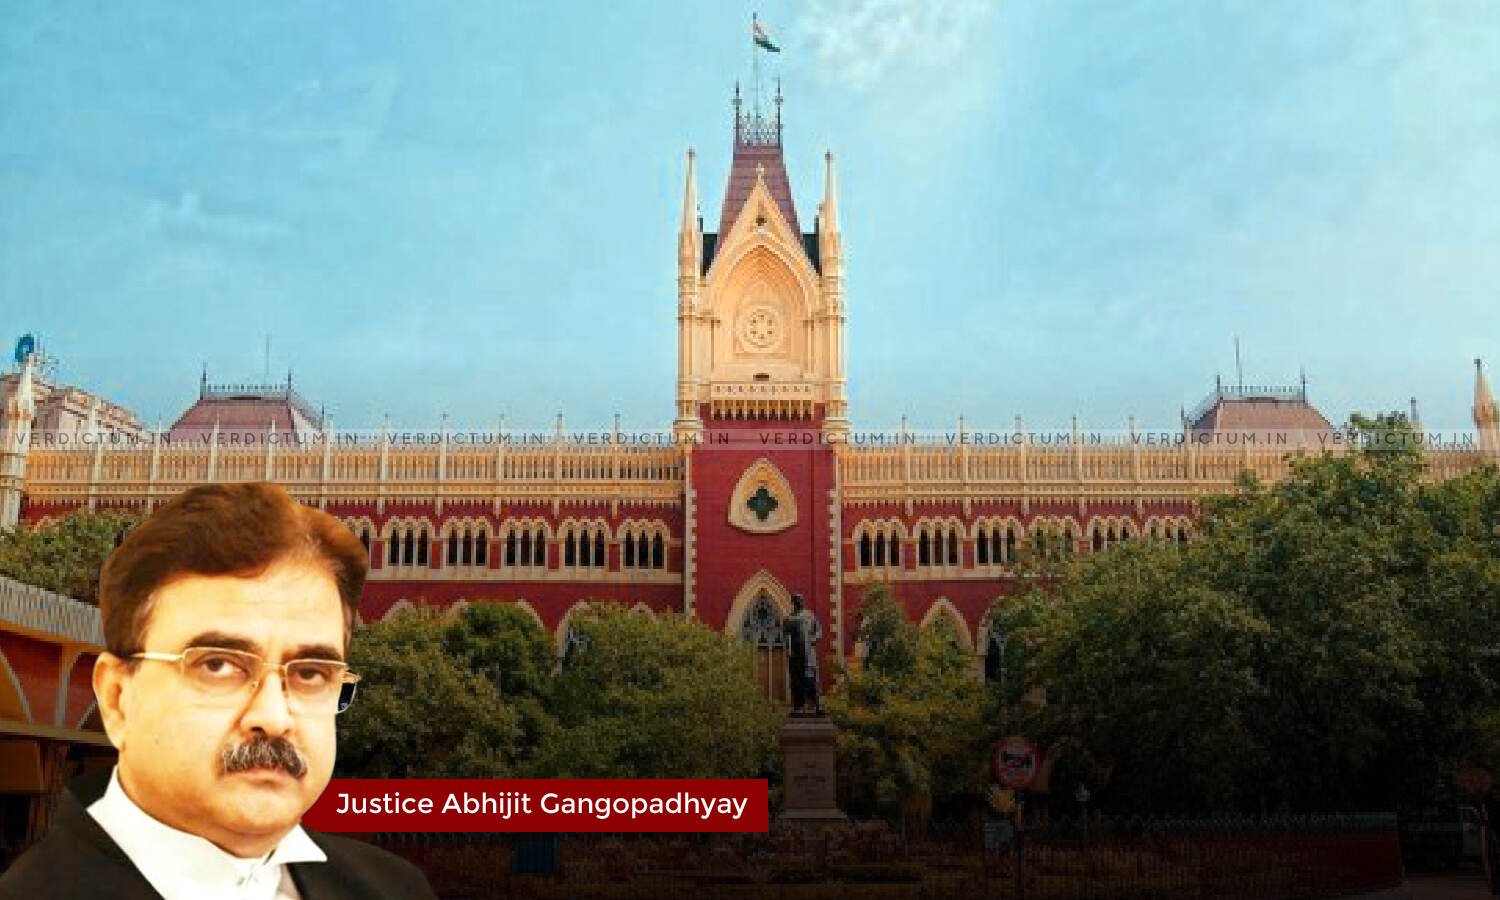 234,539 cases pending in Calcutta High Court, 41% of judge posts vacant